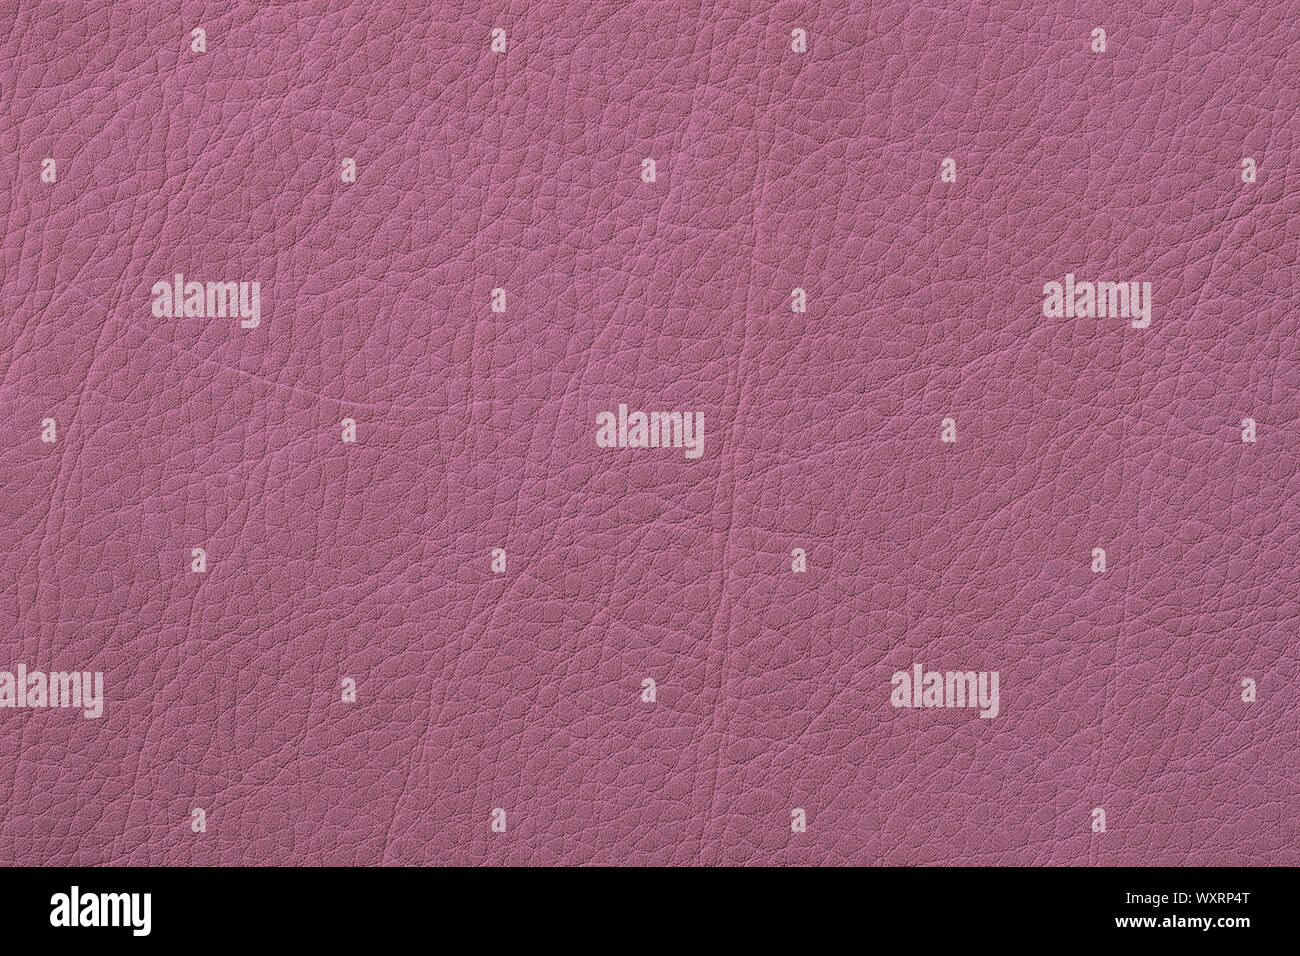 Texture of genuine grainy leather close-up, pink burgundy color for wallpaper or banner design. Fashionable modern background, copy space Stock Photo